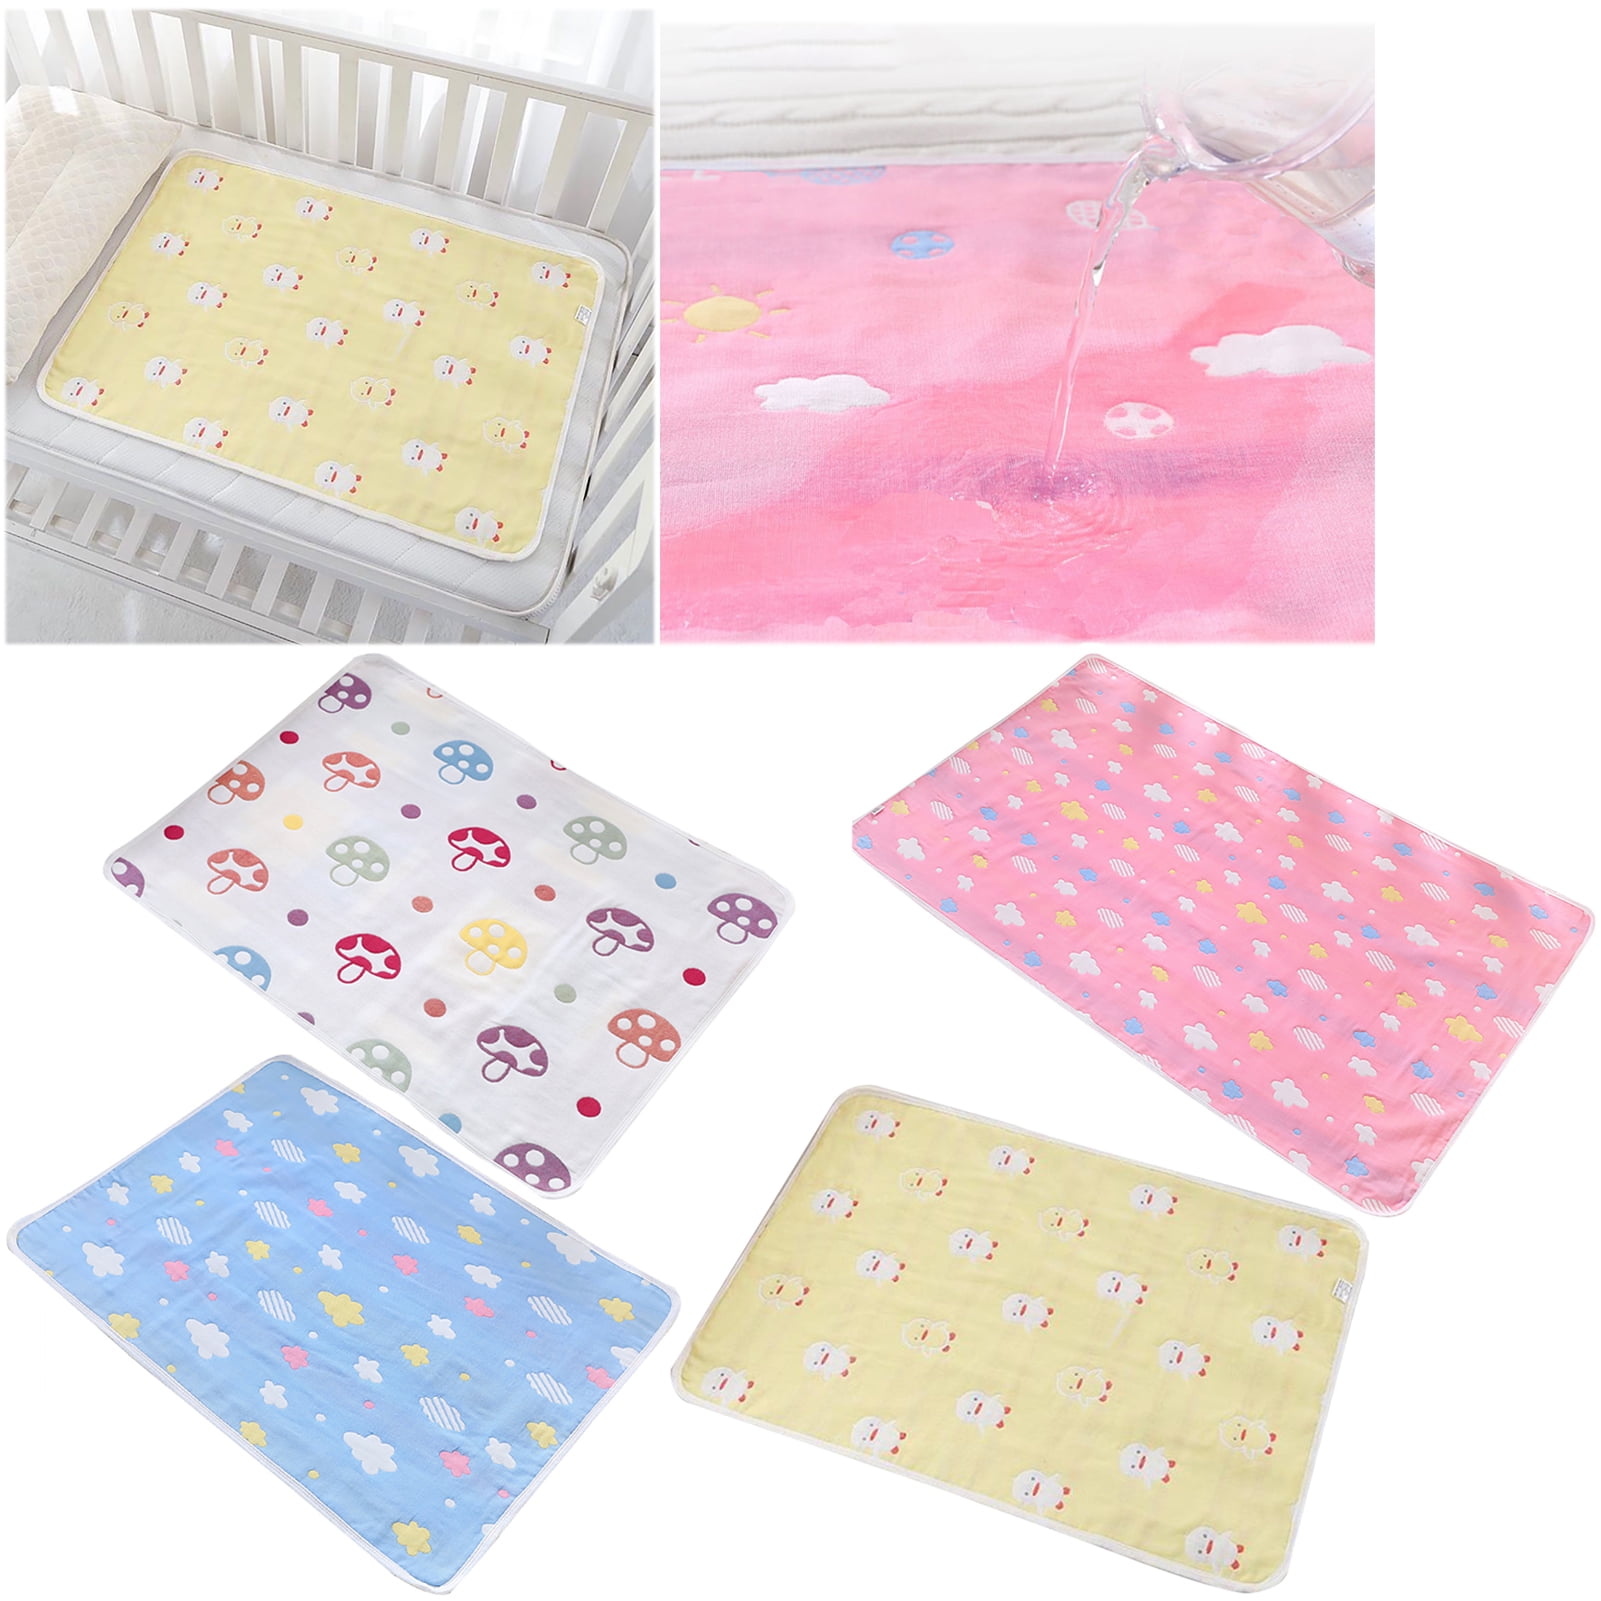 Baby Kids' Waterproof Bedding Diapering Changing Mat Washable Breathable Cotton 